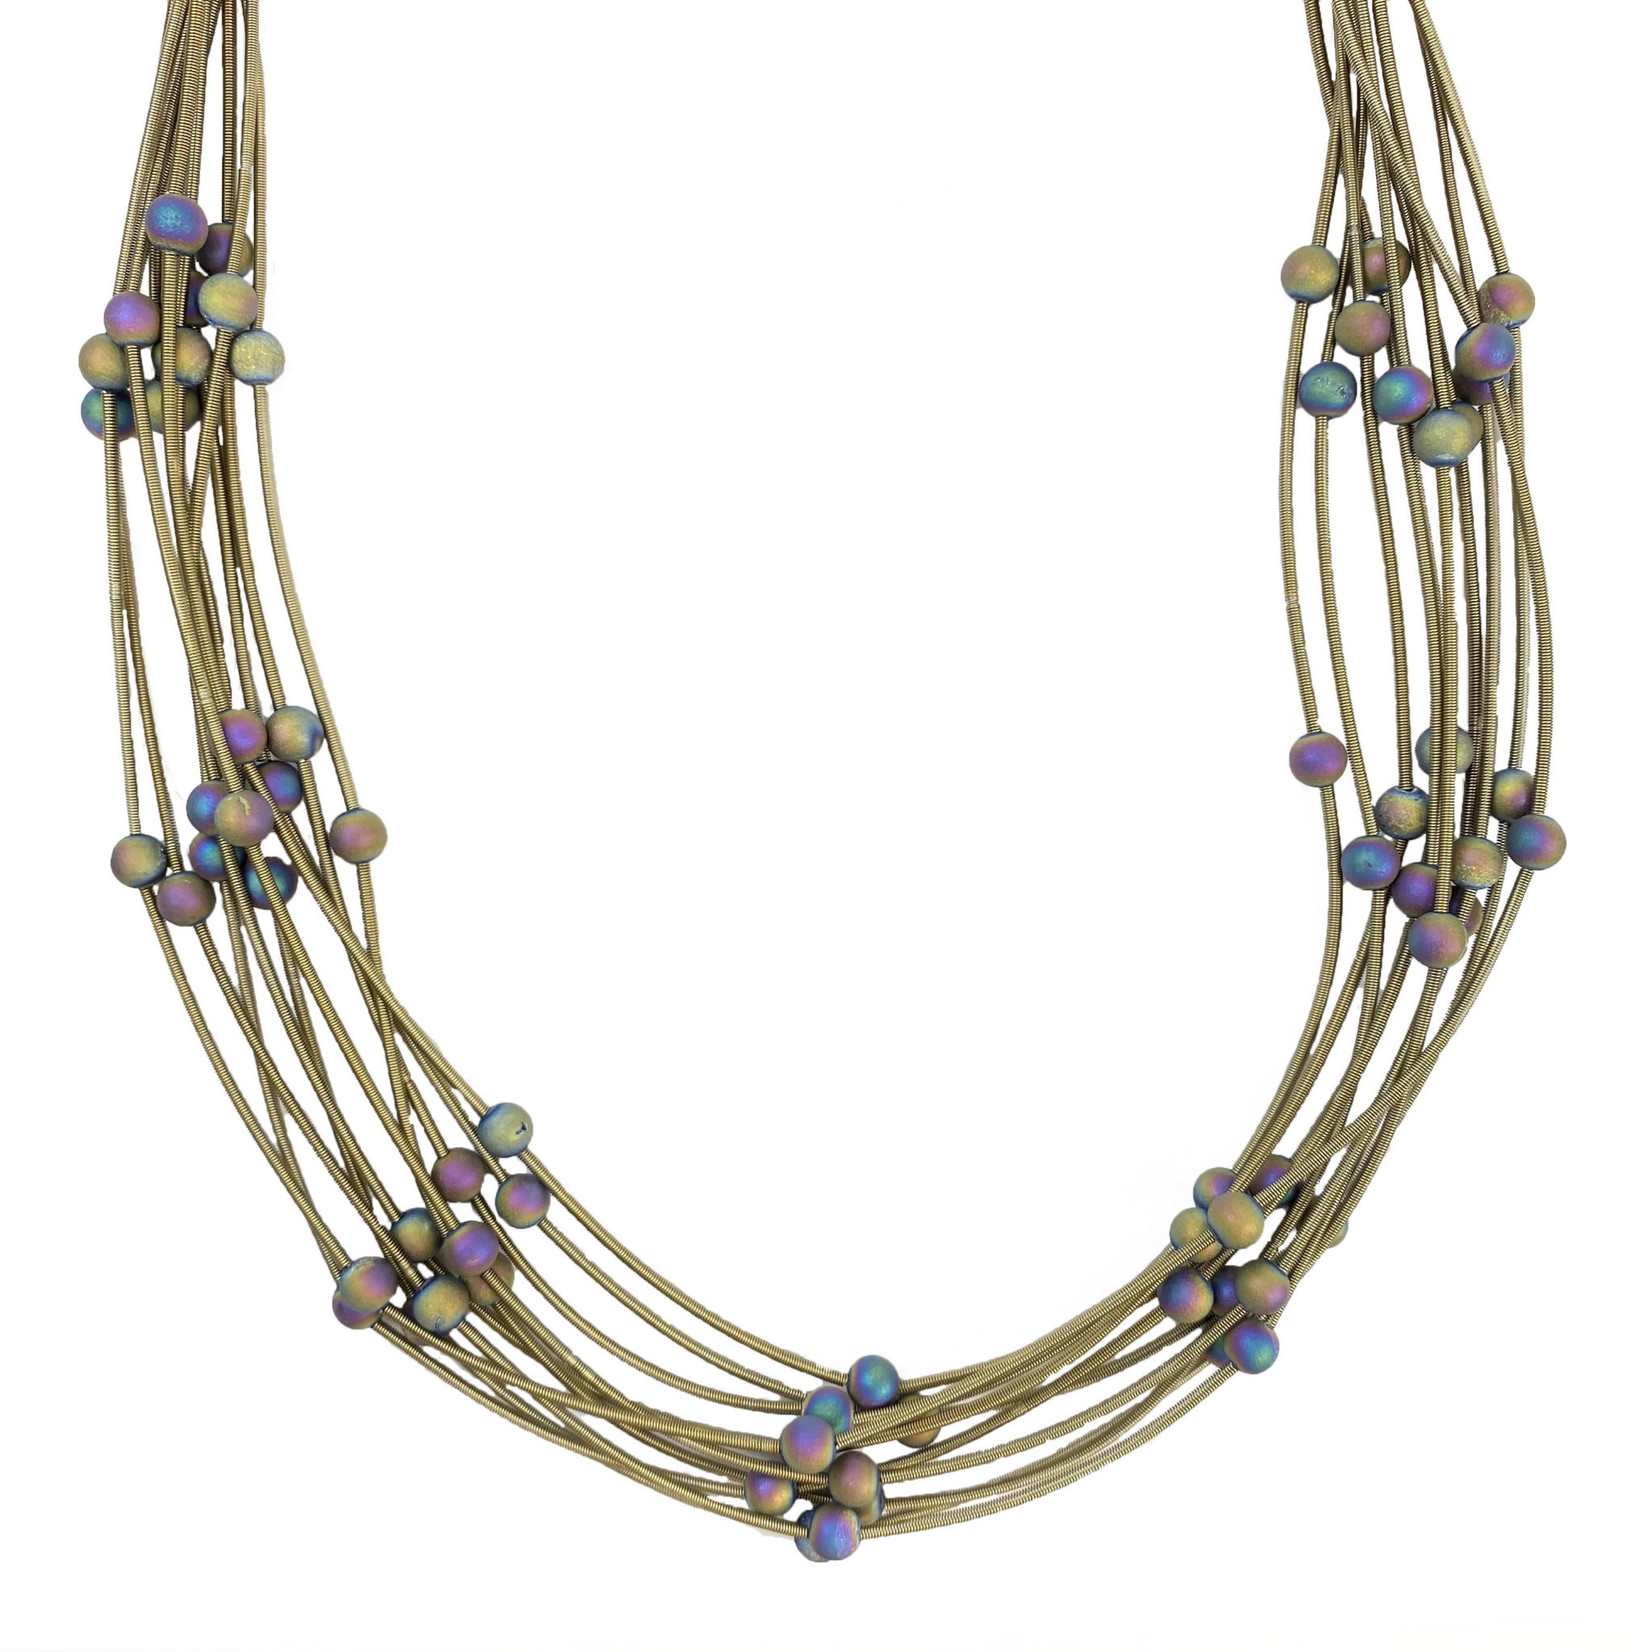 Bronze 10 Layer Silk Infused Wire Necklace with Geode Stones